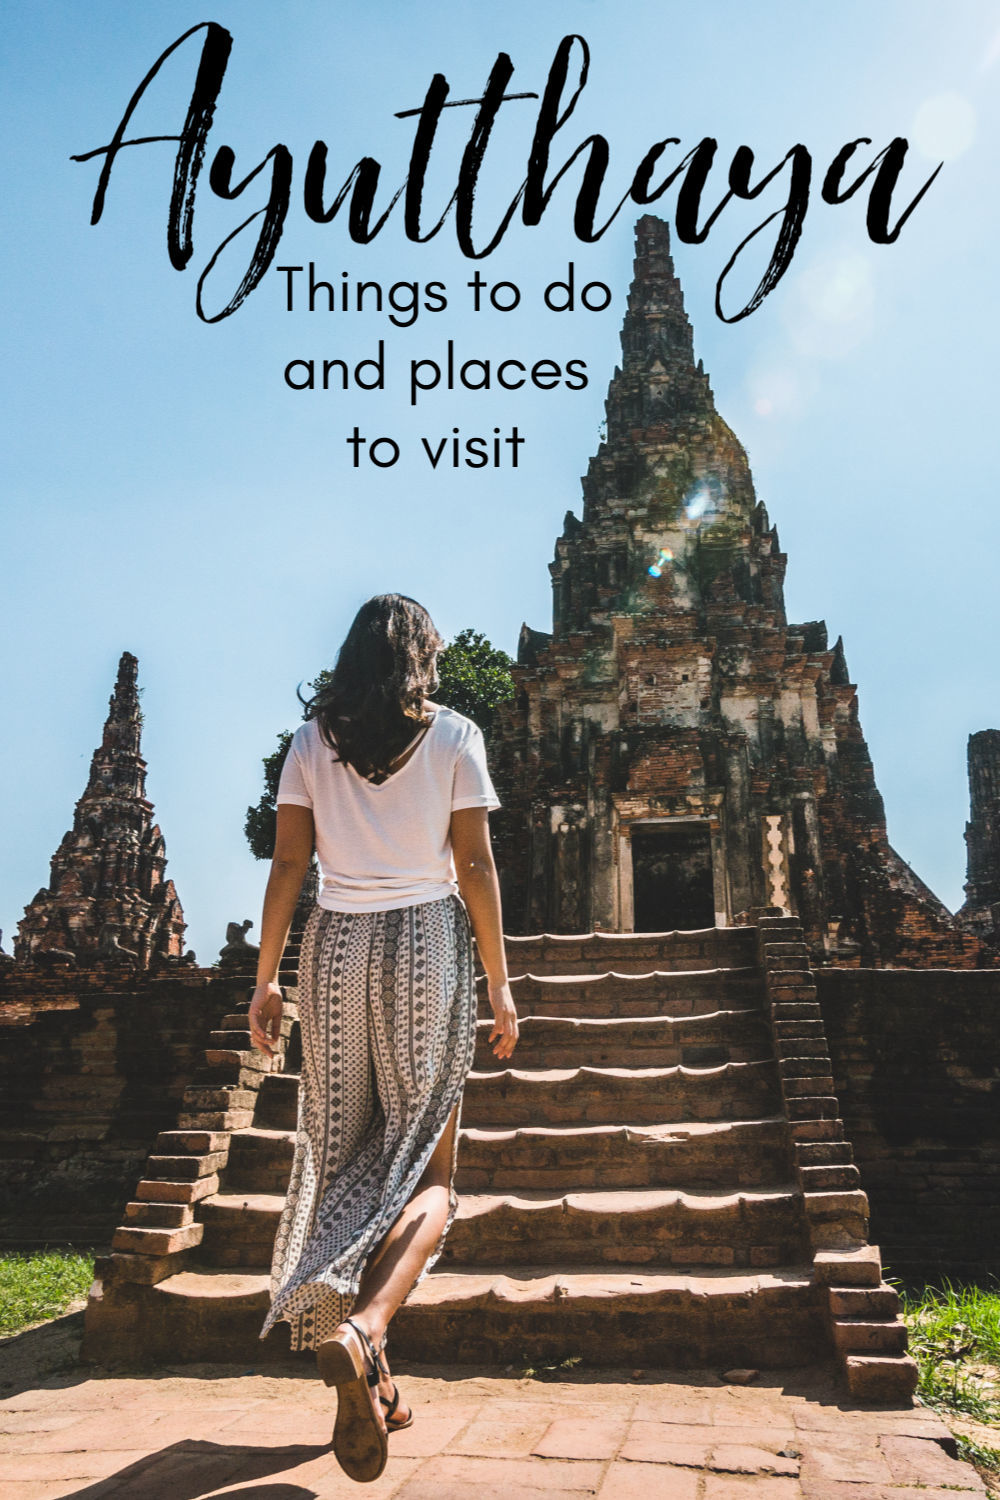 The ultimate guide to Ayutthaya, Thailand. Everything you need to know to plan your Ayutthaya day trip or a more extended stay. We listed the best things to do in Ayutthaya, temples, floating markets, night markets, local experiences, the best tours from Bangkok to Ayutthaya, and where to stay there. Follow our travel tips and enjoy the magnificent ancient capital of Thailand. #AyutthayaThailand #Ayutthayatemples #Ayutthayahotel #Ayutthayahistoricalpark #Ayutthayaphotography